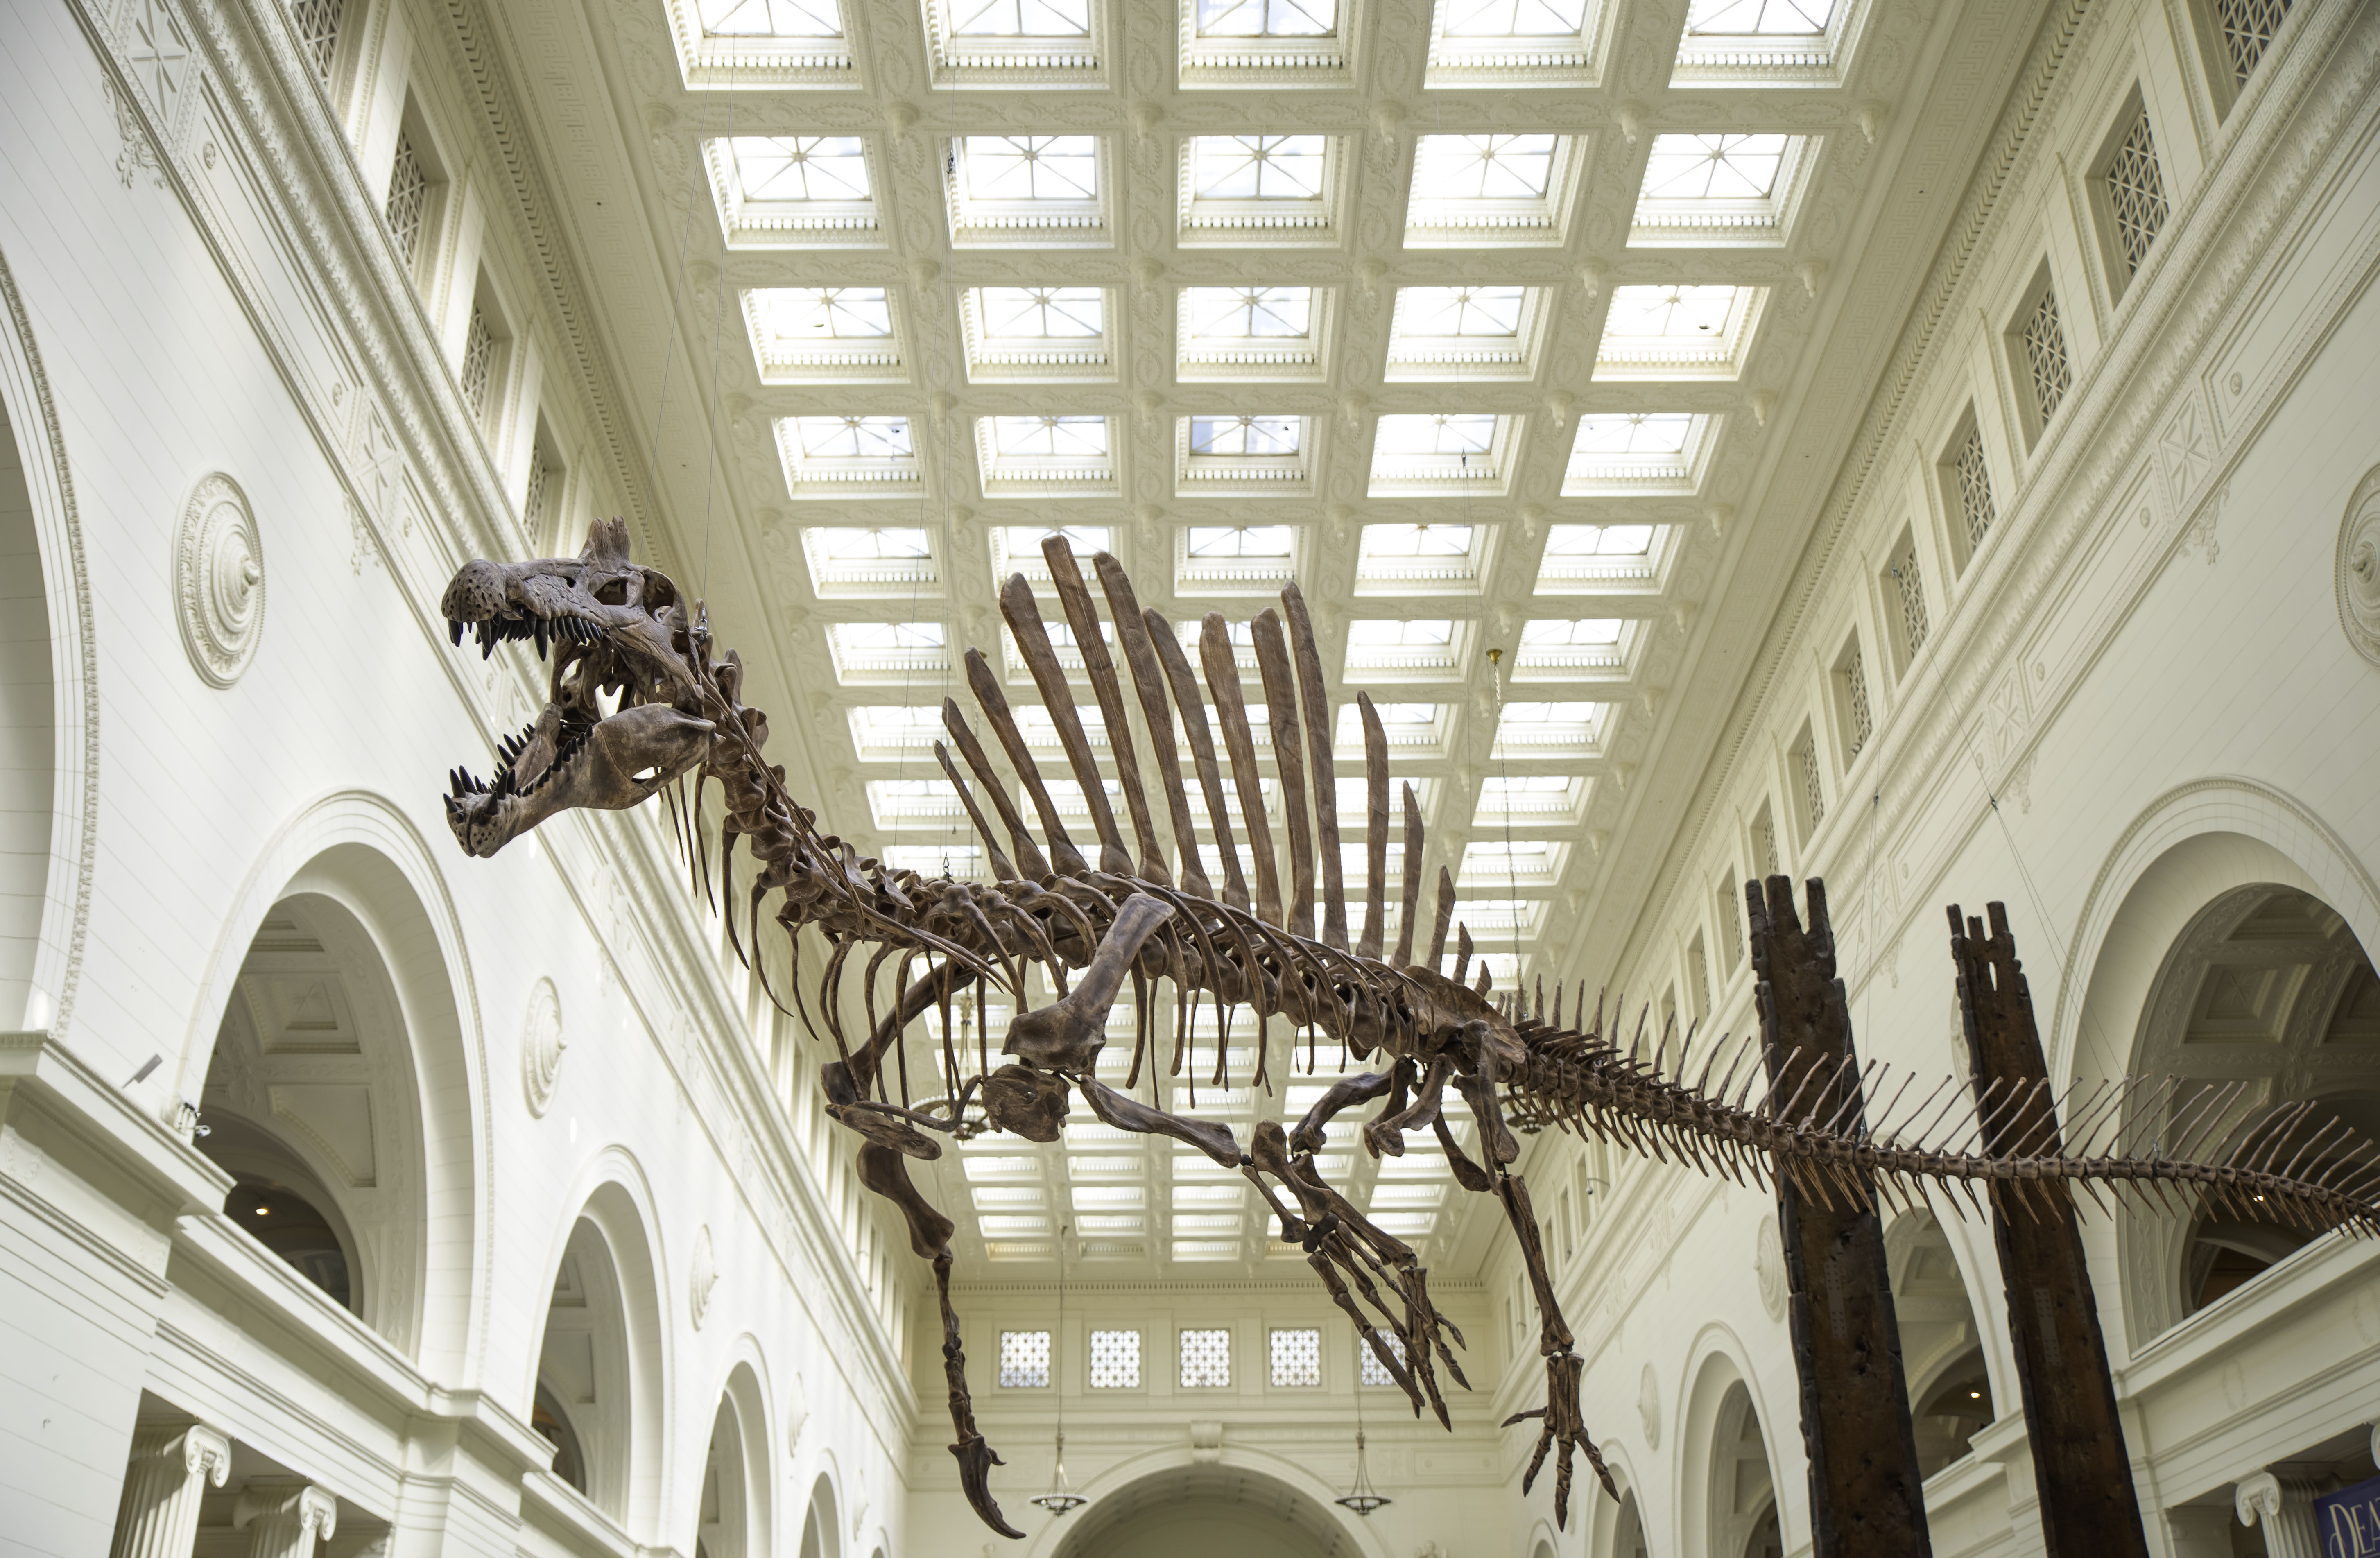 A spinosaurus fossil cast suspended from the ceiling of a large hall with skylights